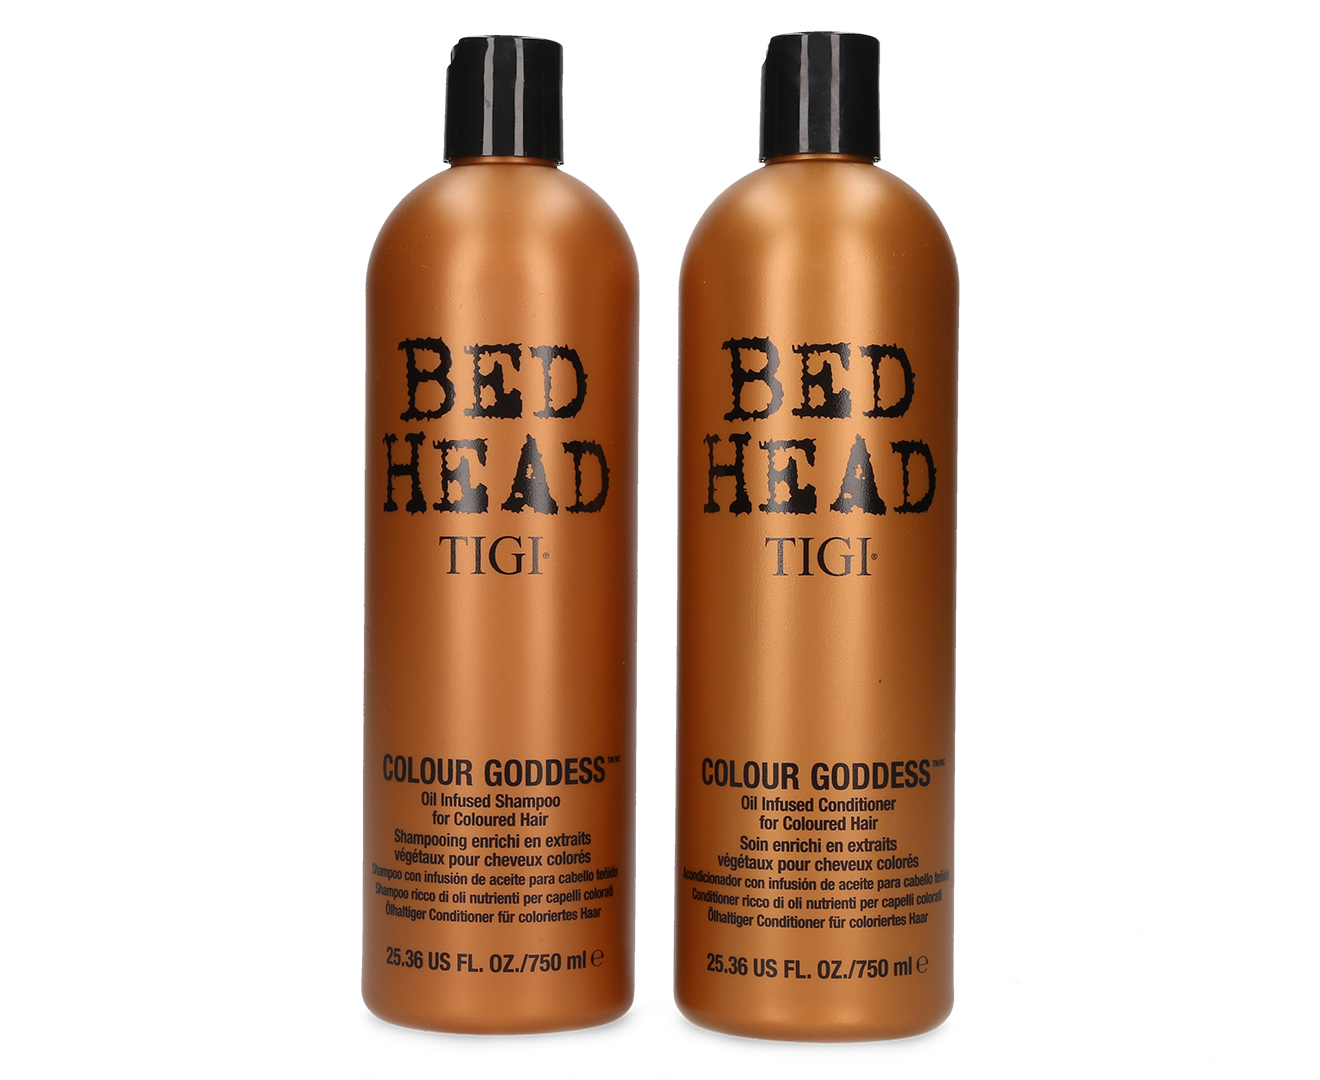 7. "Blue Shampoo for White and Light Hair" by TIGI Bed Head - wide 5